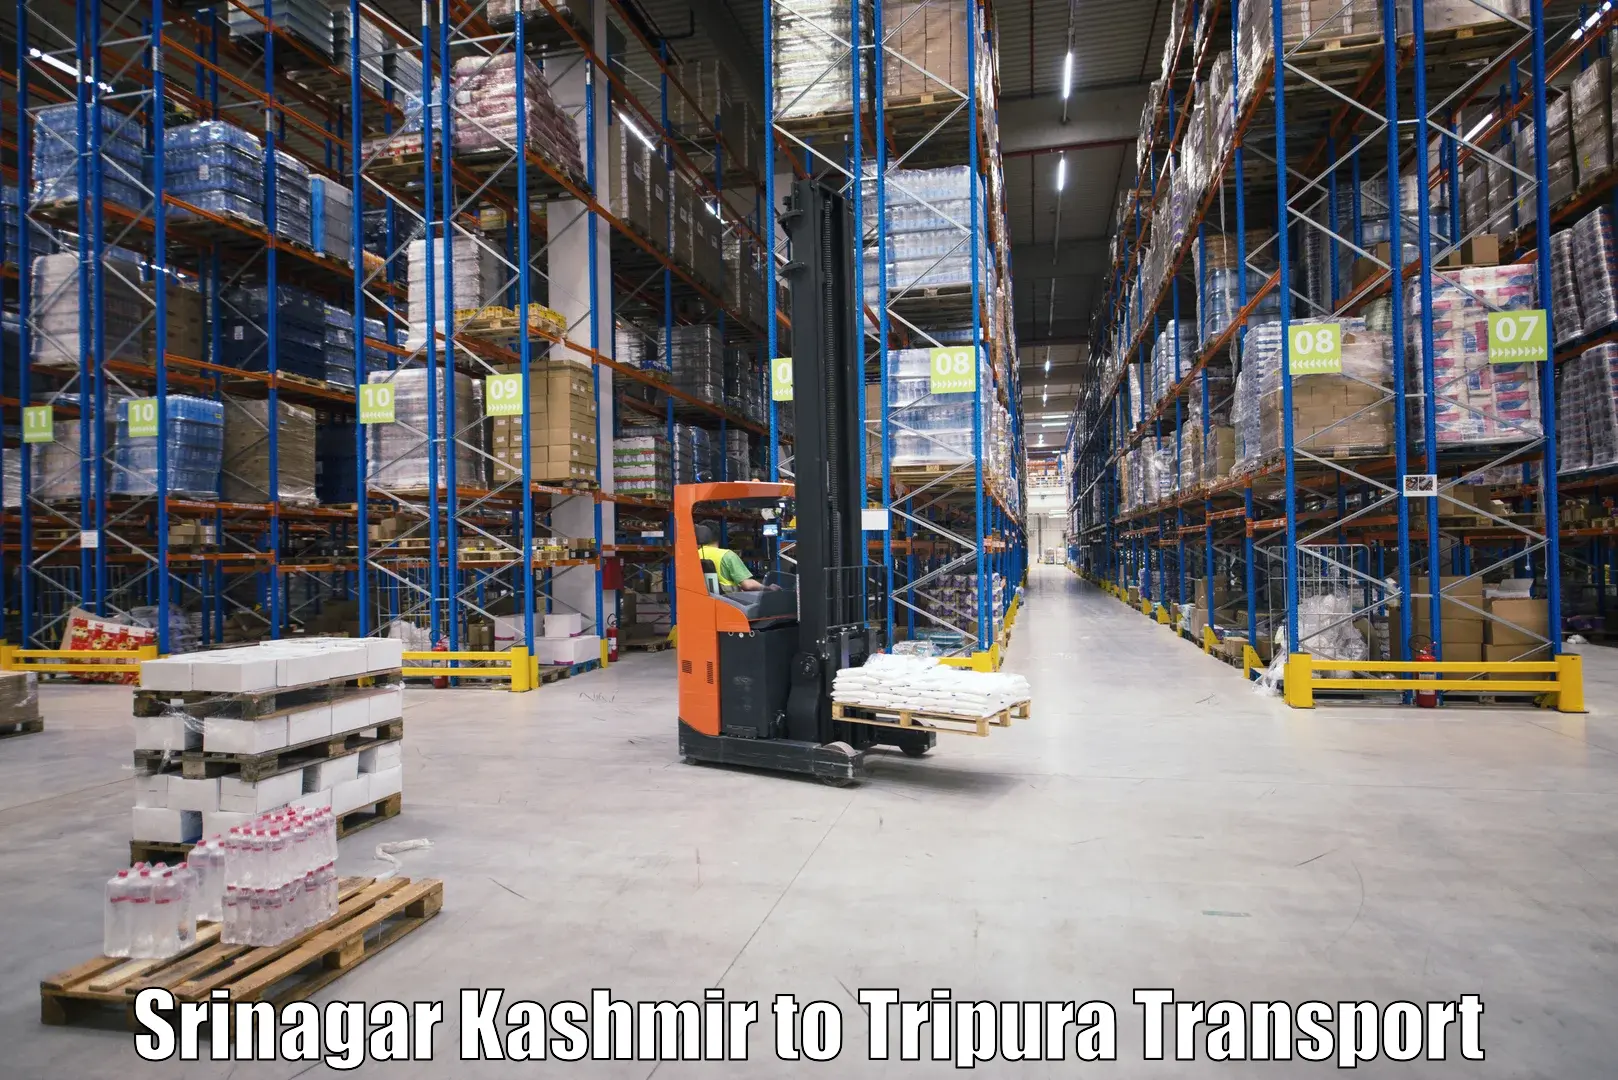 Transport bike from one state to another Srinagar Kashmir to Kailashahar